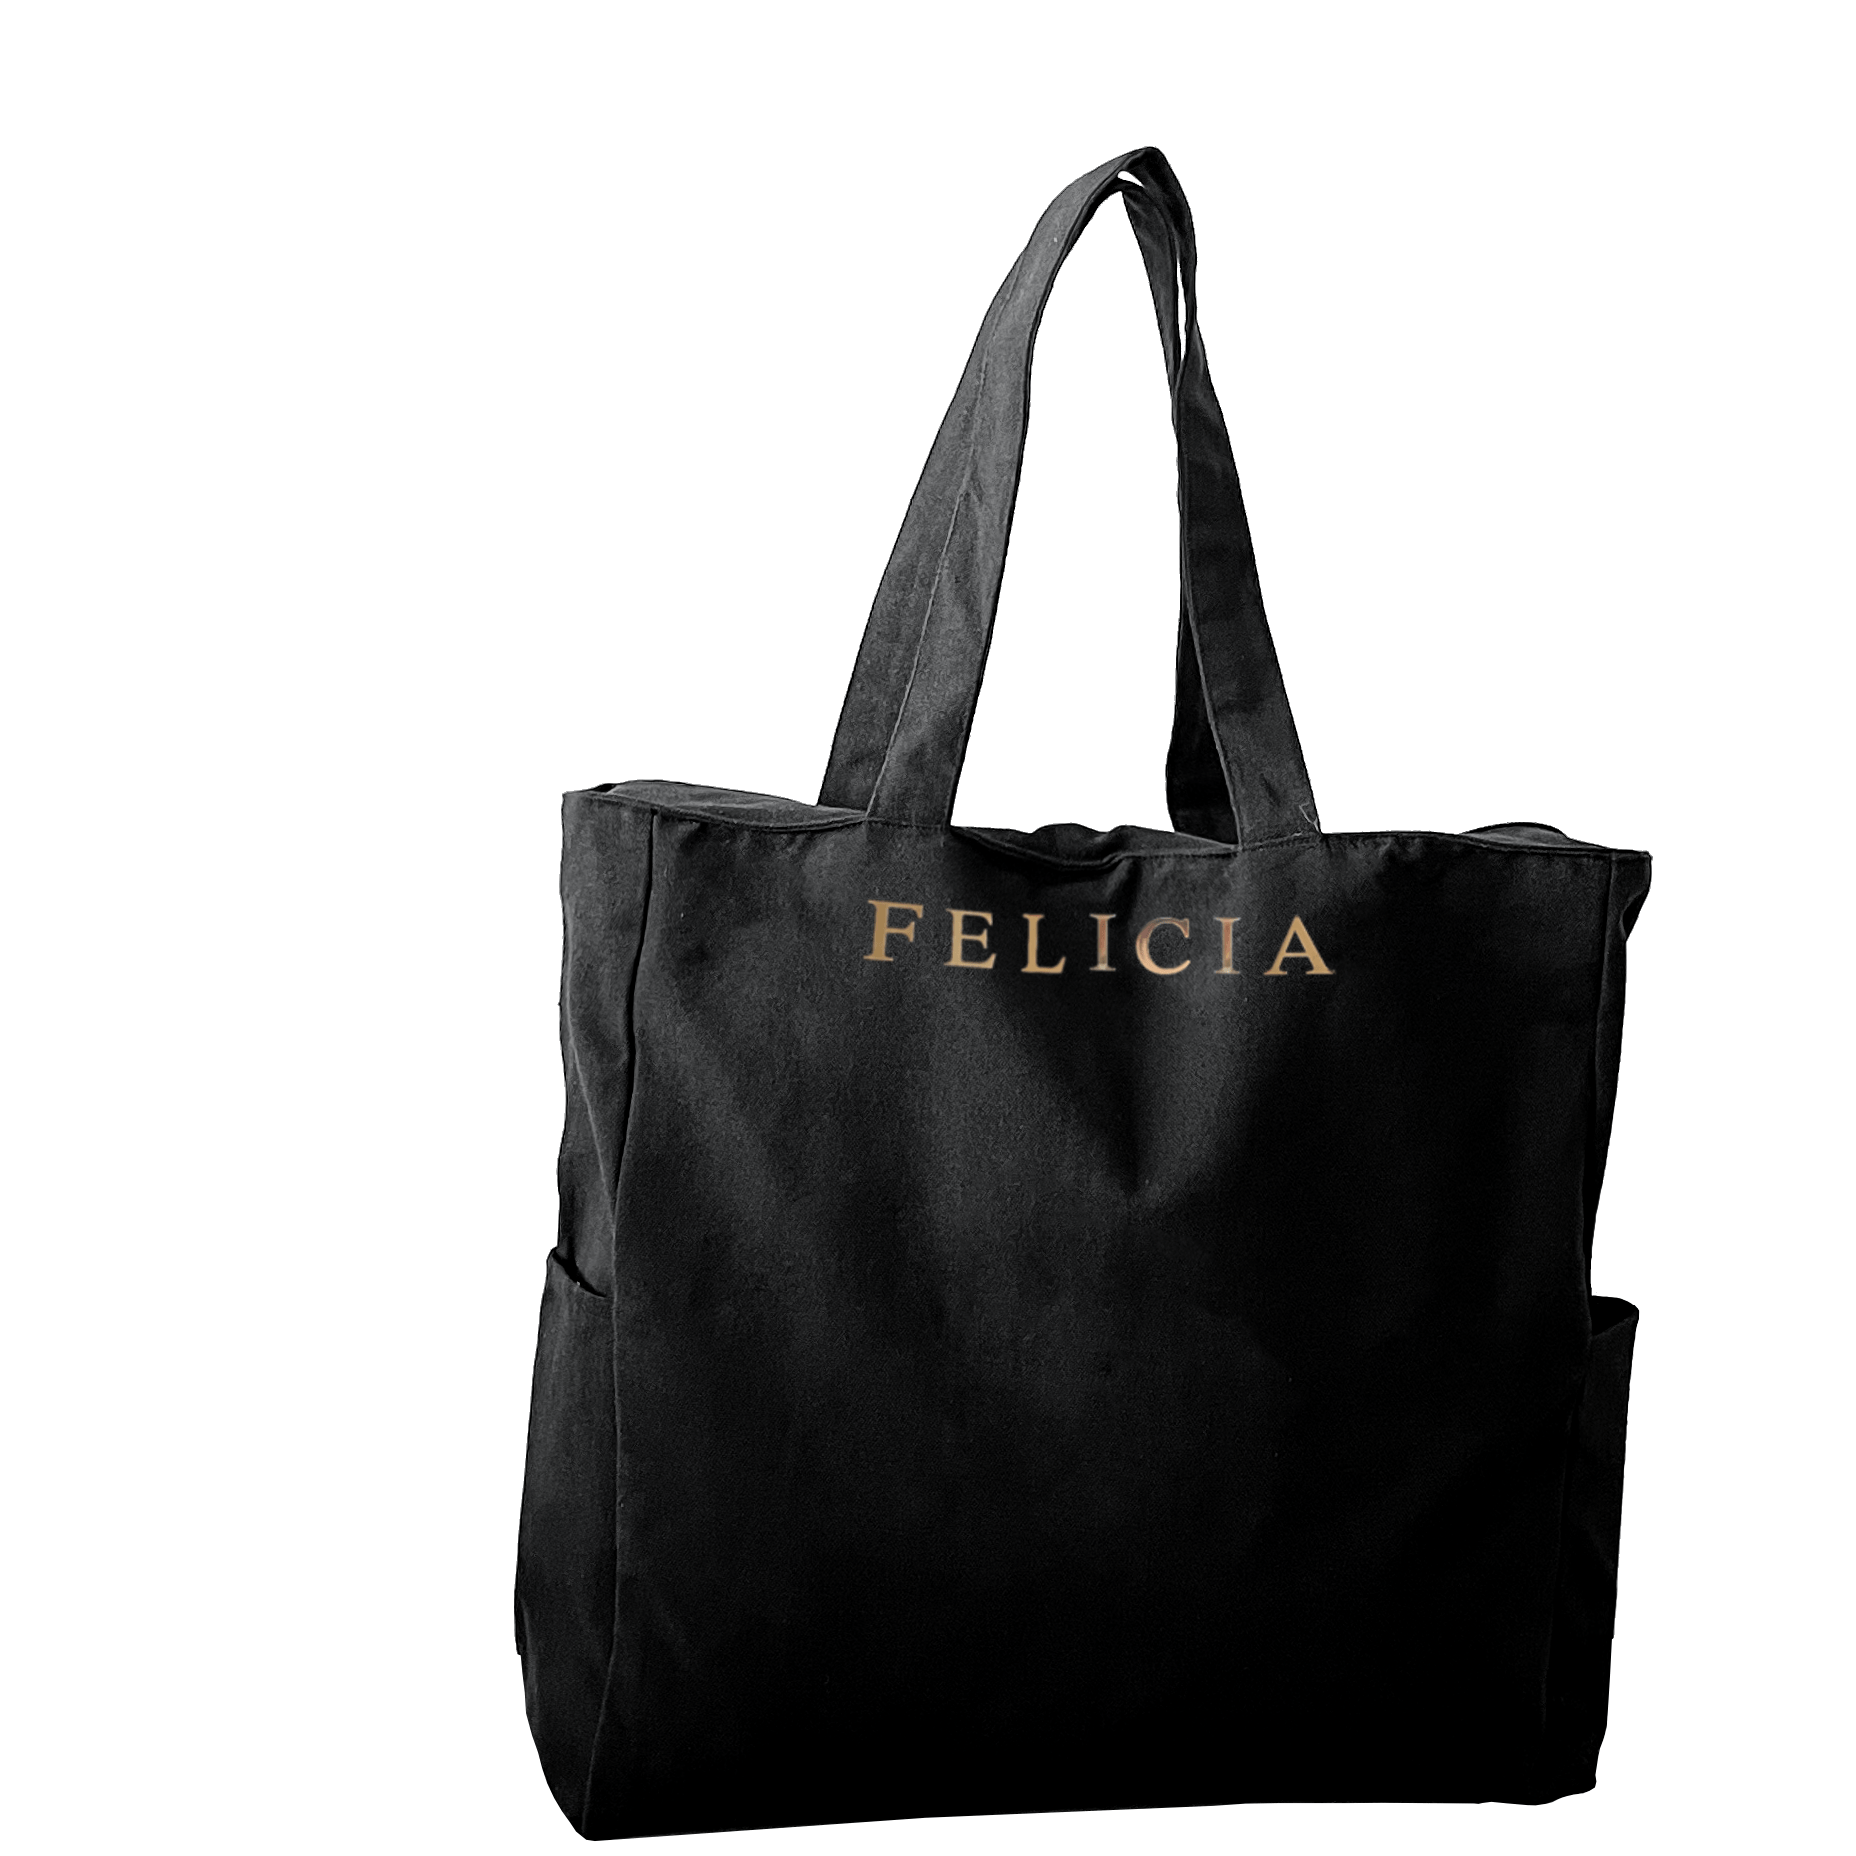 pinbuds 1-2 Letters Personalised Cotton Tote Bag (inc. Gold Letter Pins) - black